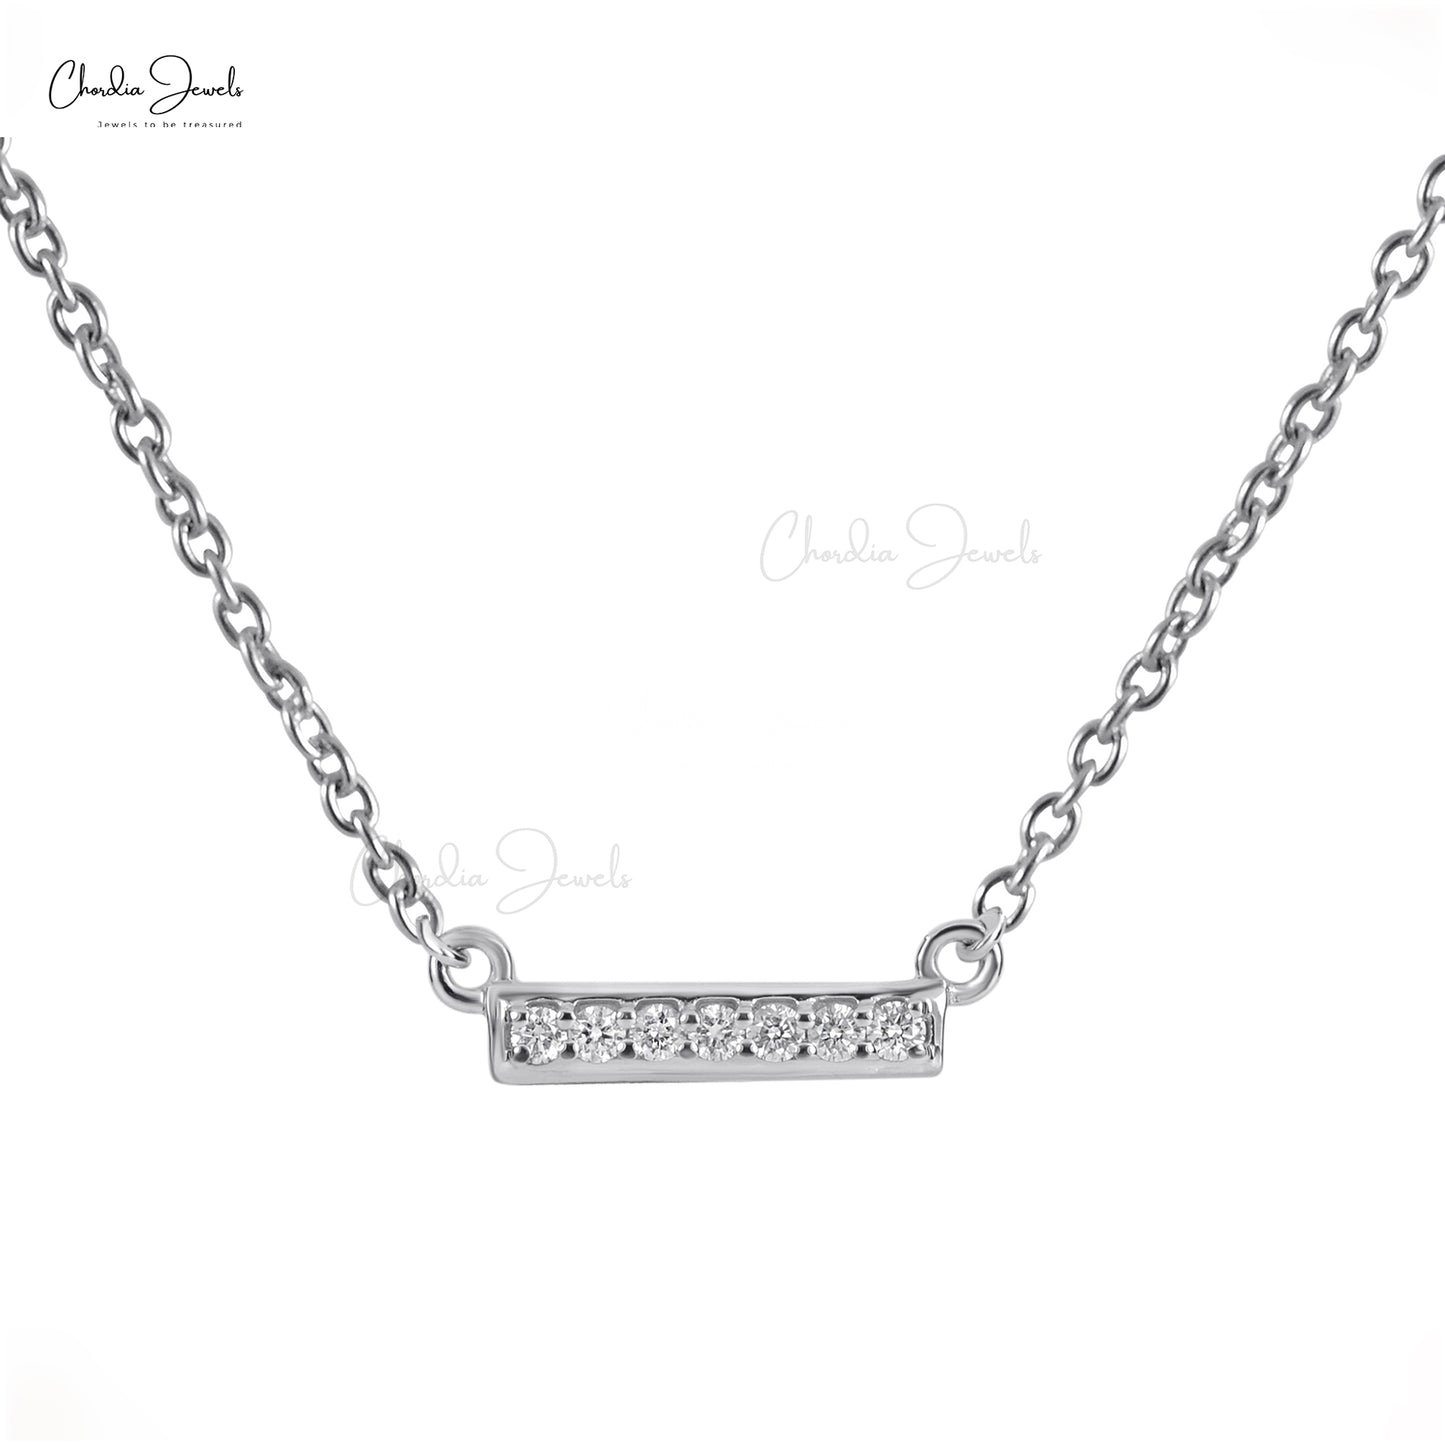 Load image into Gallery viewer, Pave Set Diamond Dainty Necklace 1.6mm Round Gemstone Necklace 14k Solid White Gold Necklace Jewelry
